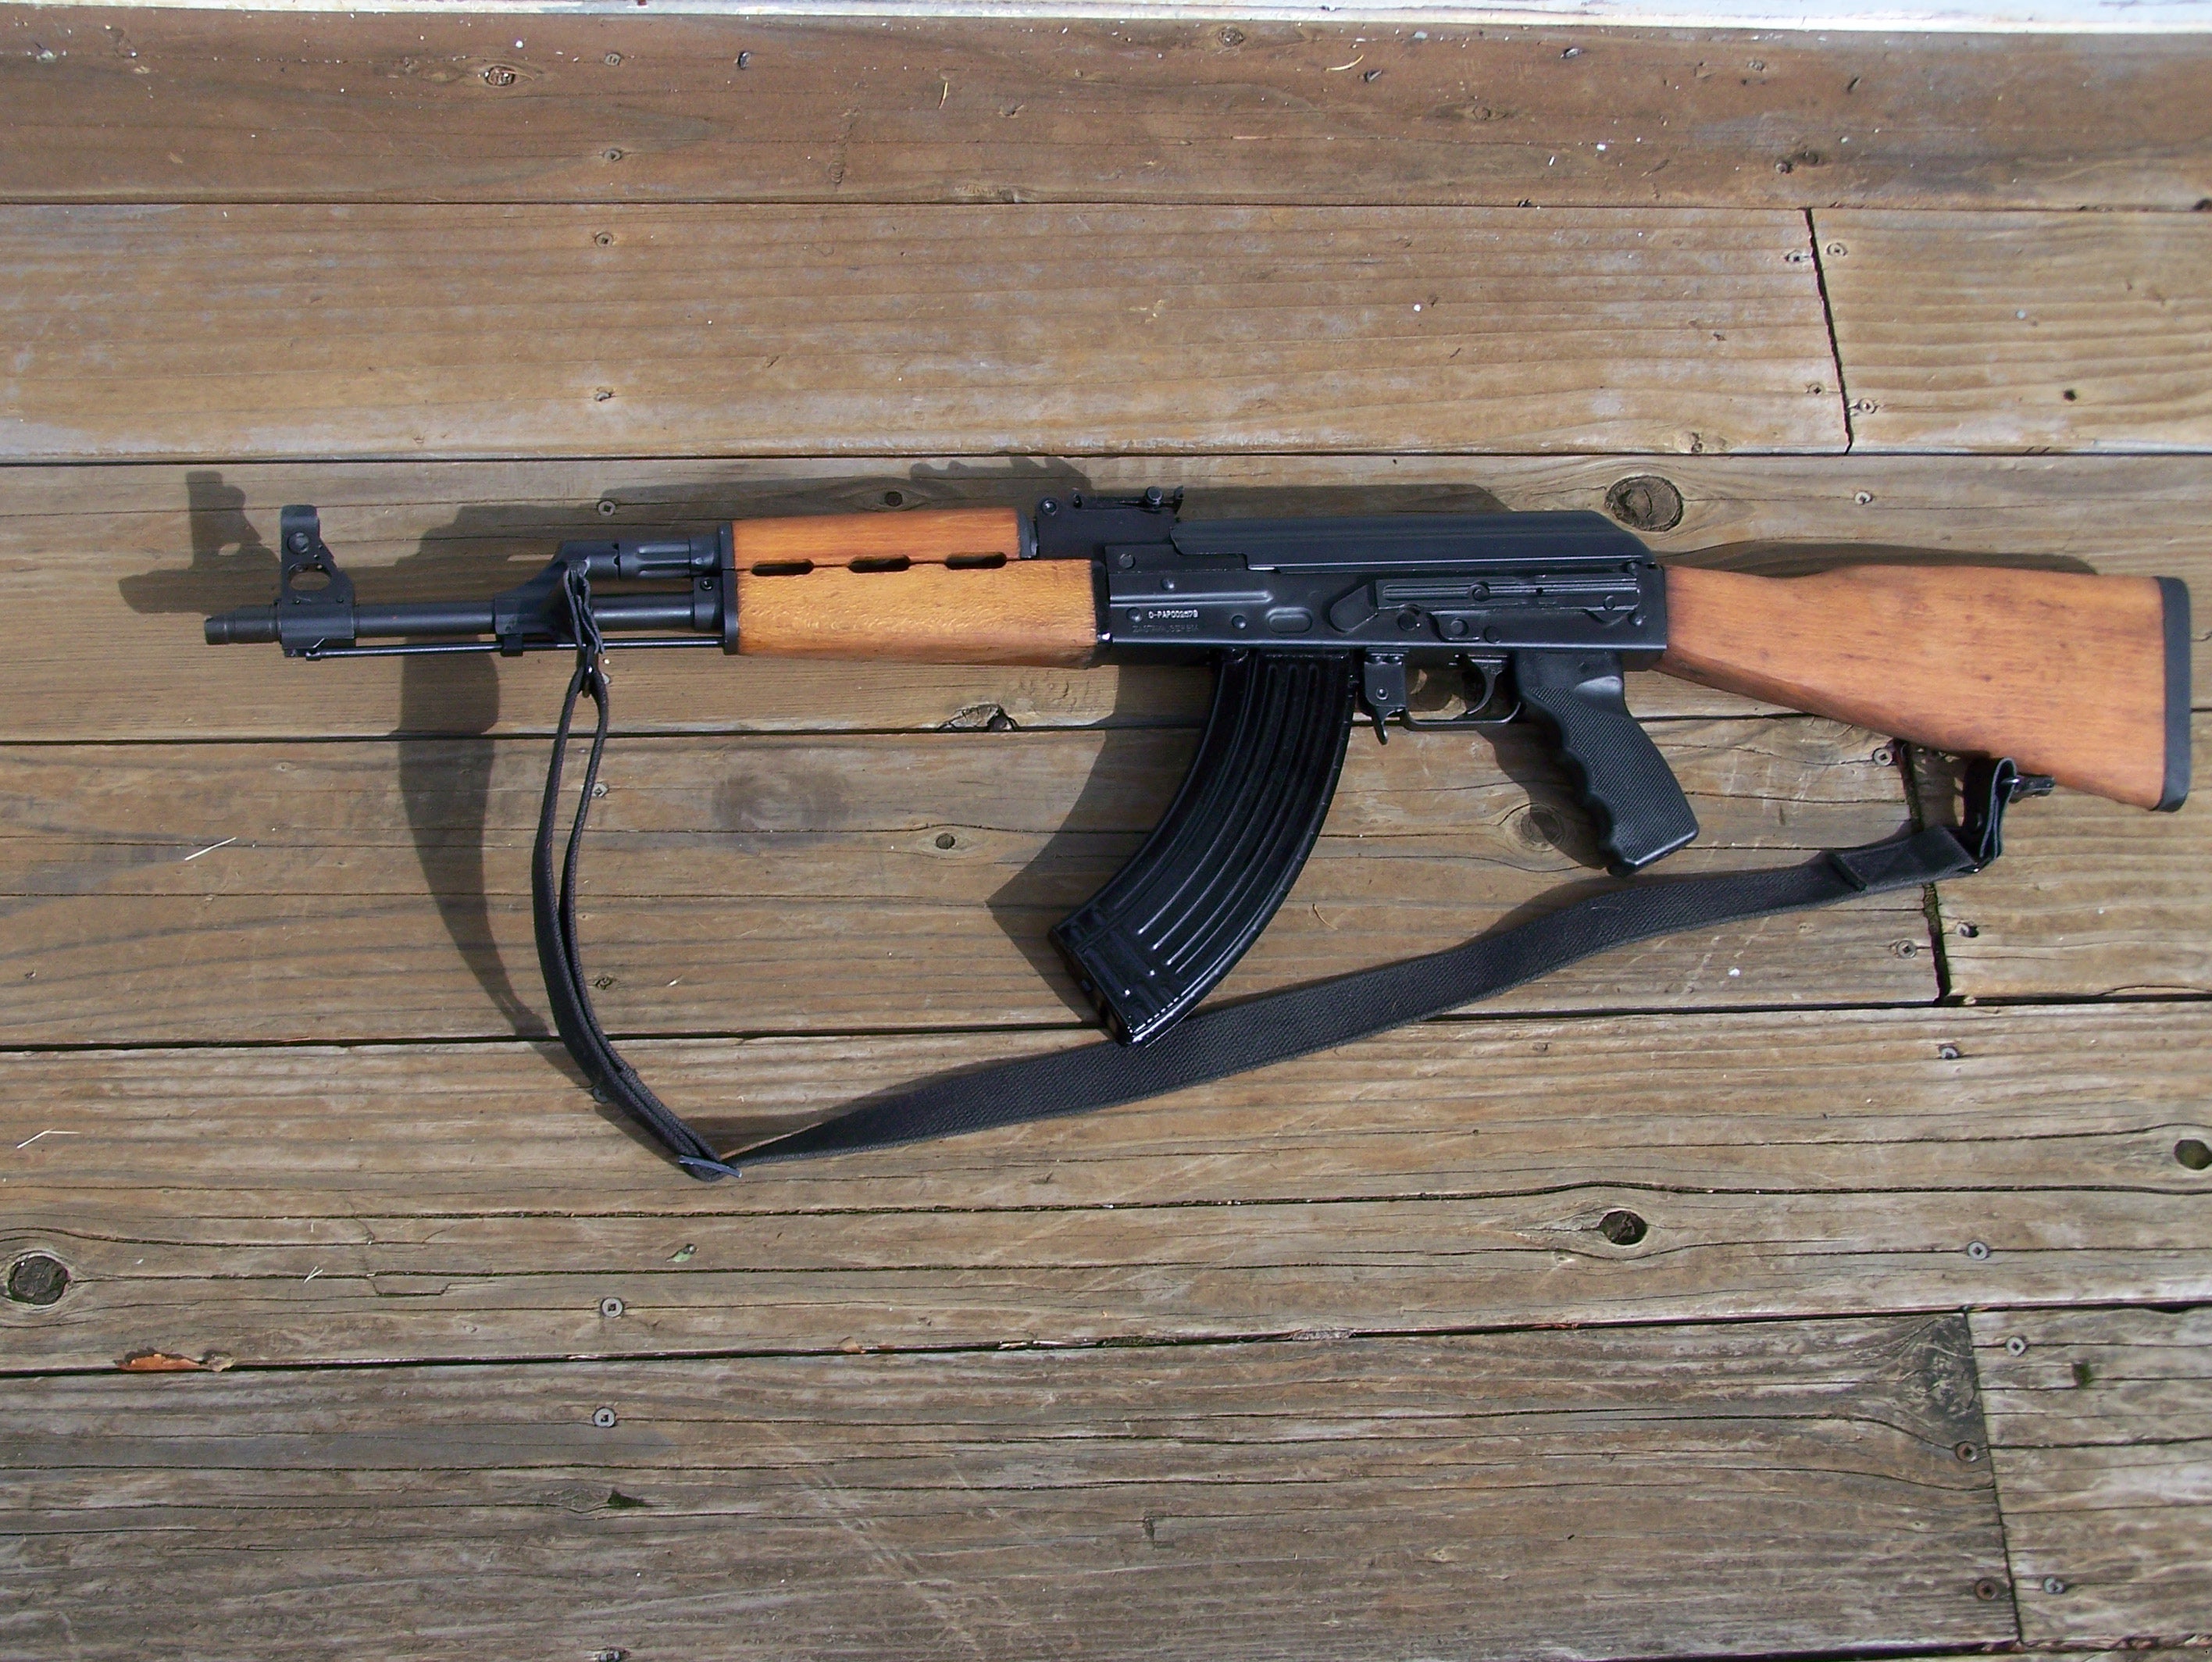 The O-Pap M70 is a Yugo-inspired AK produced in the Zastava Arms Factory